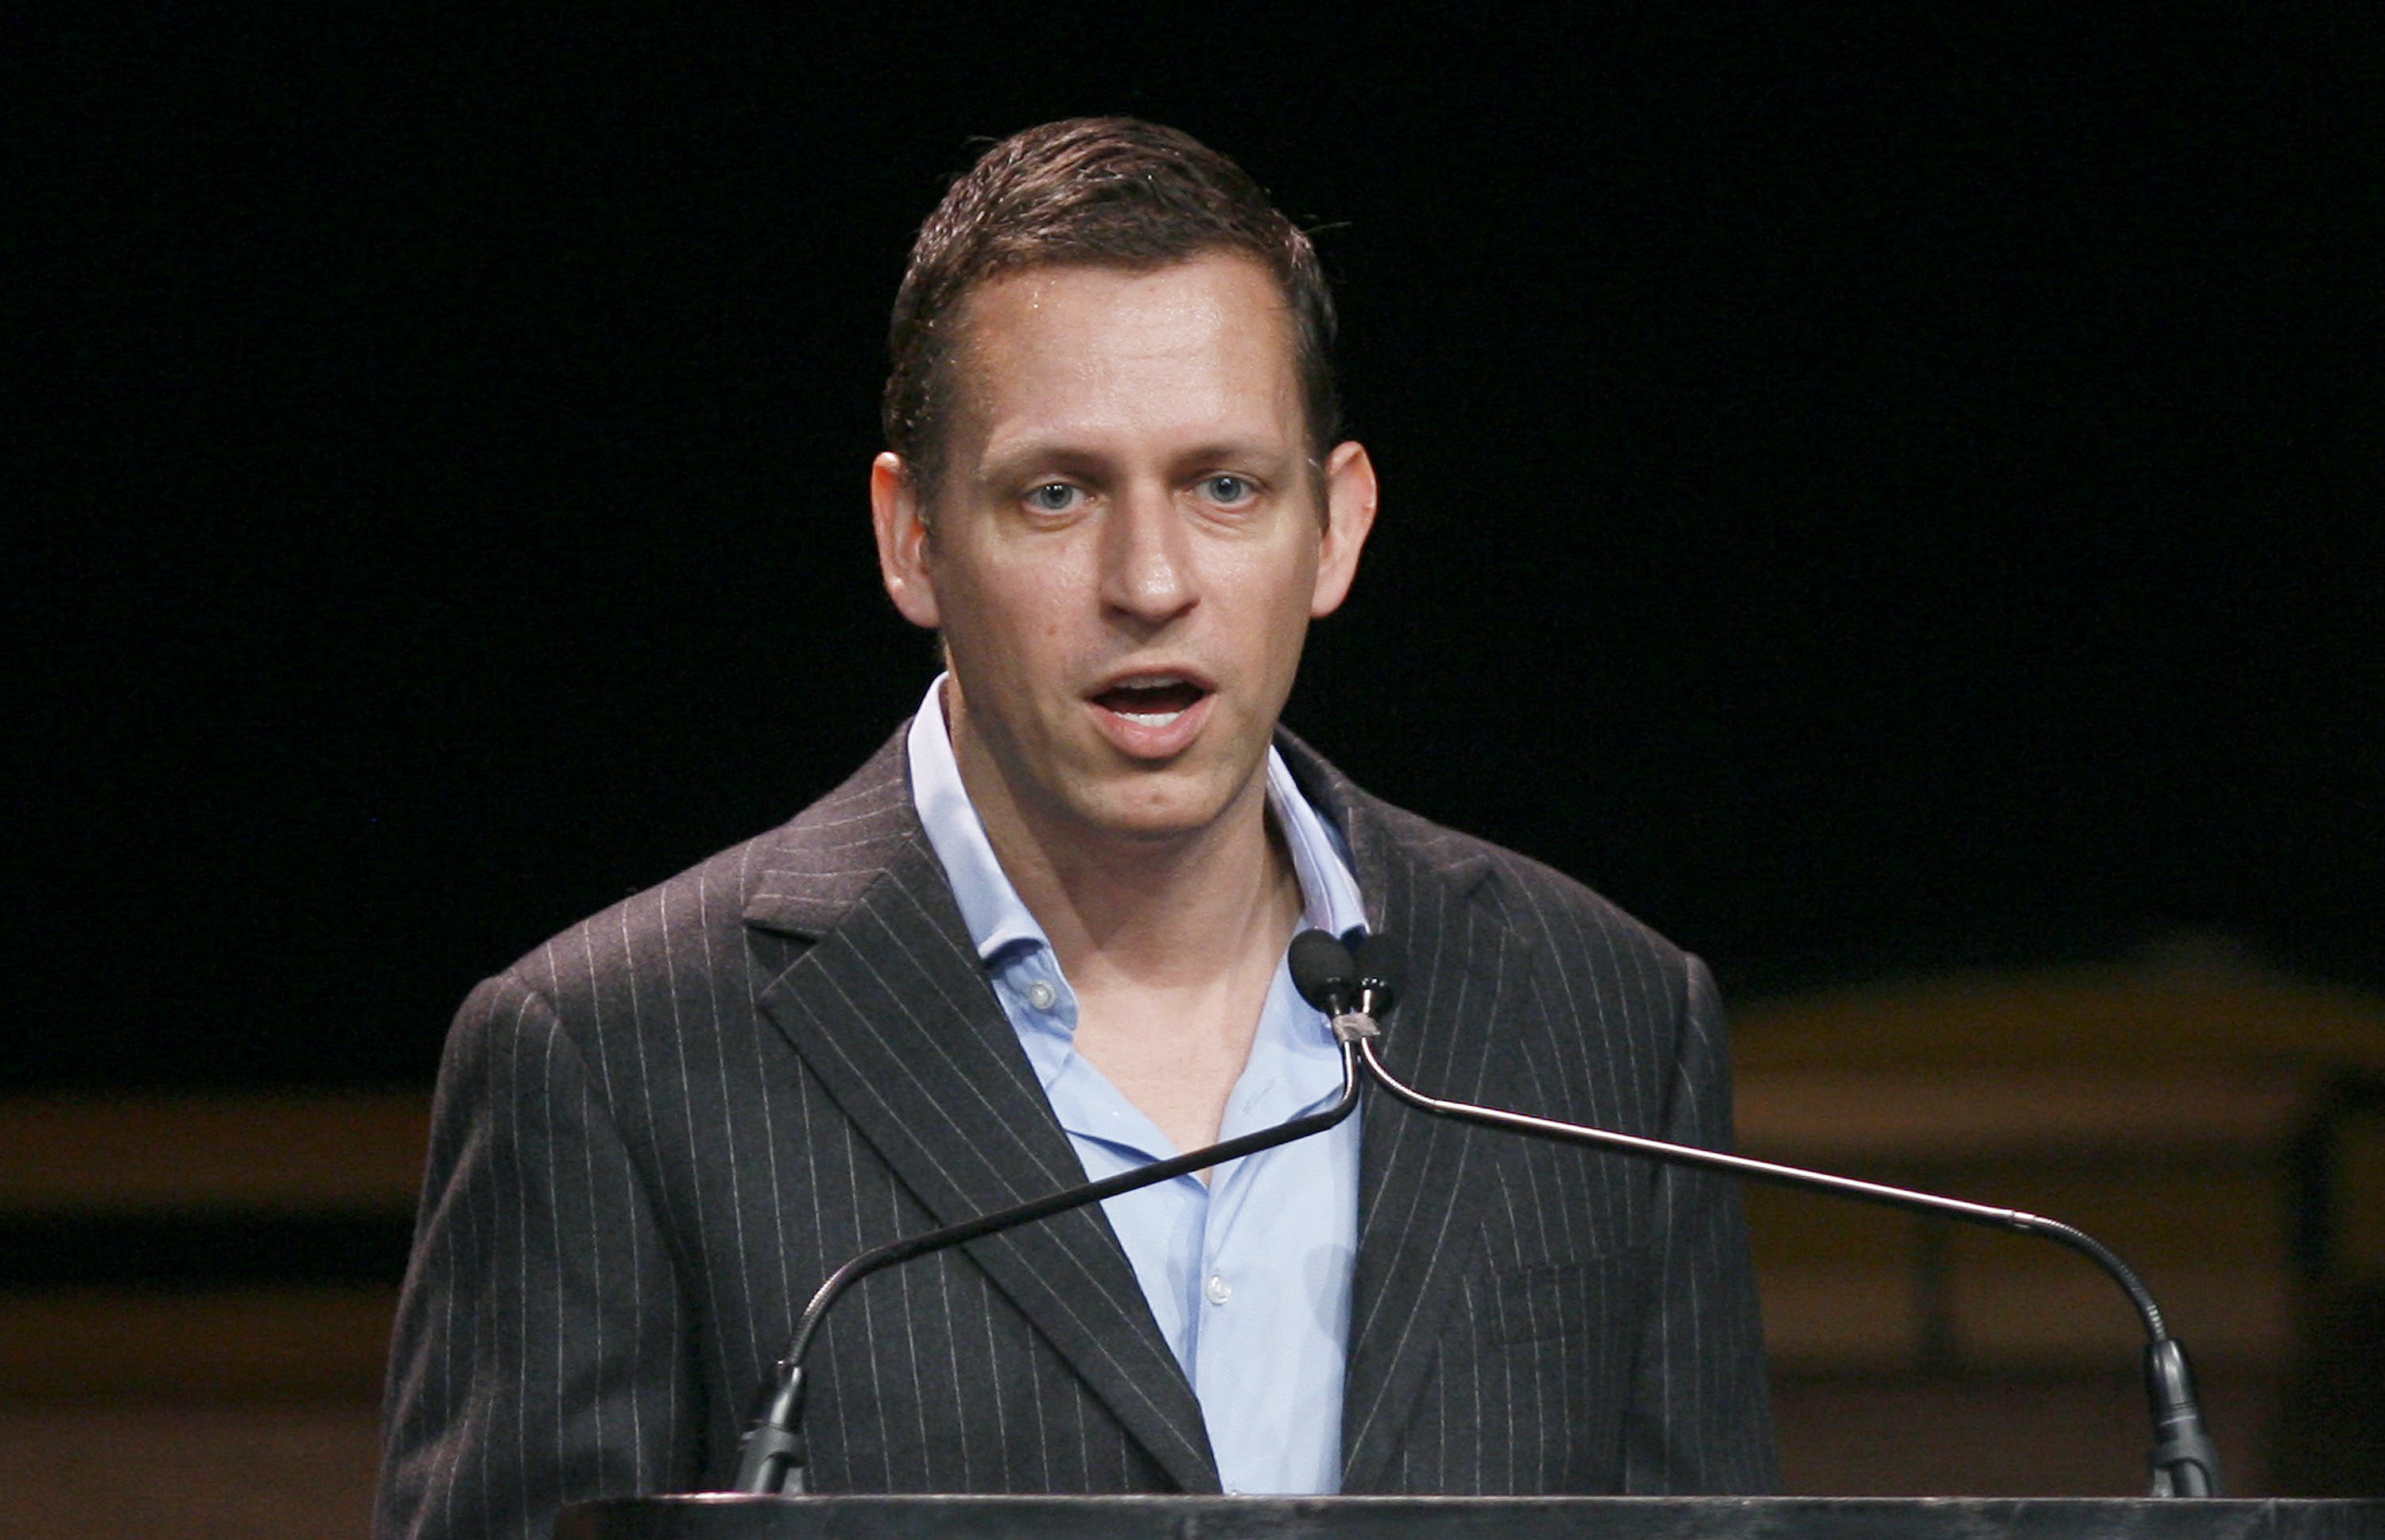 Peter Thiel of Clarium Capital speaks during the Ira W. Sohn investment research conference in New York